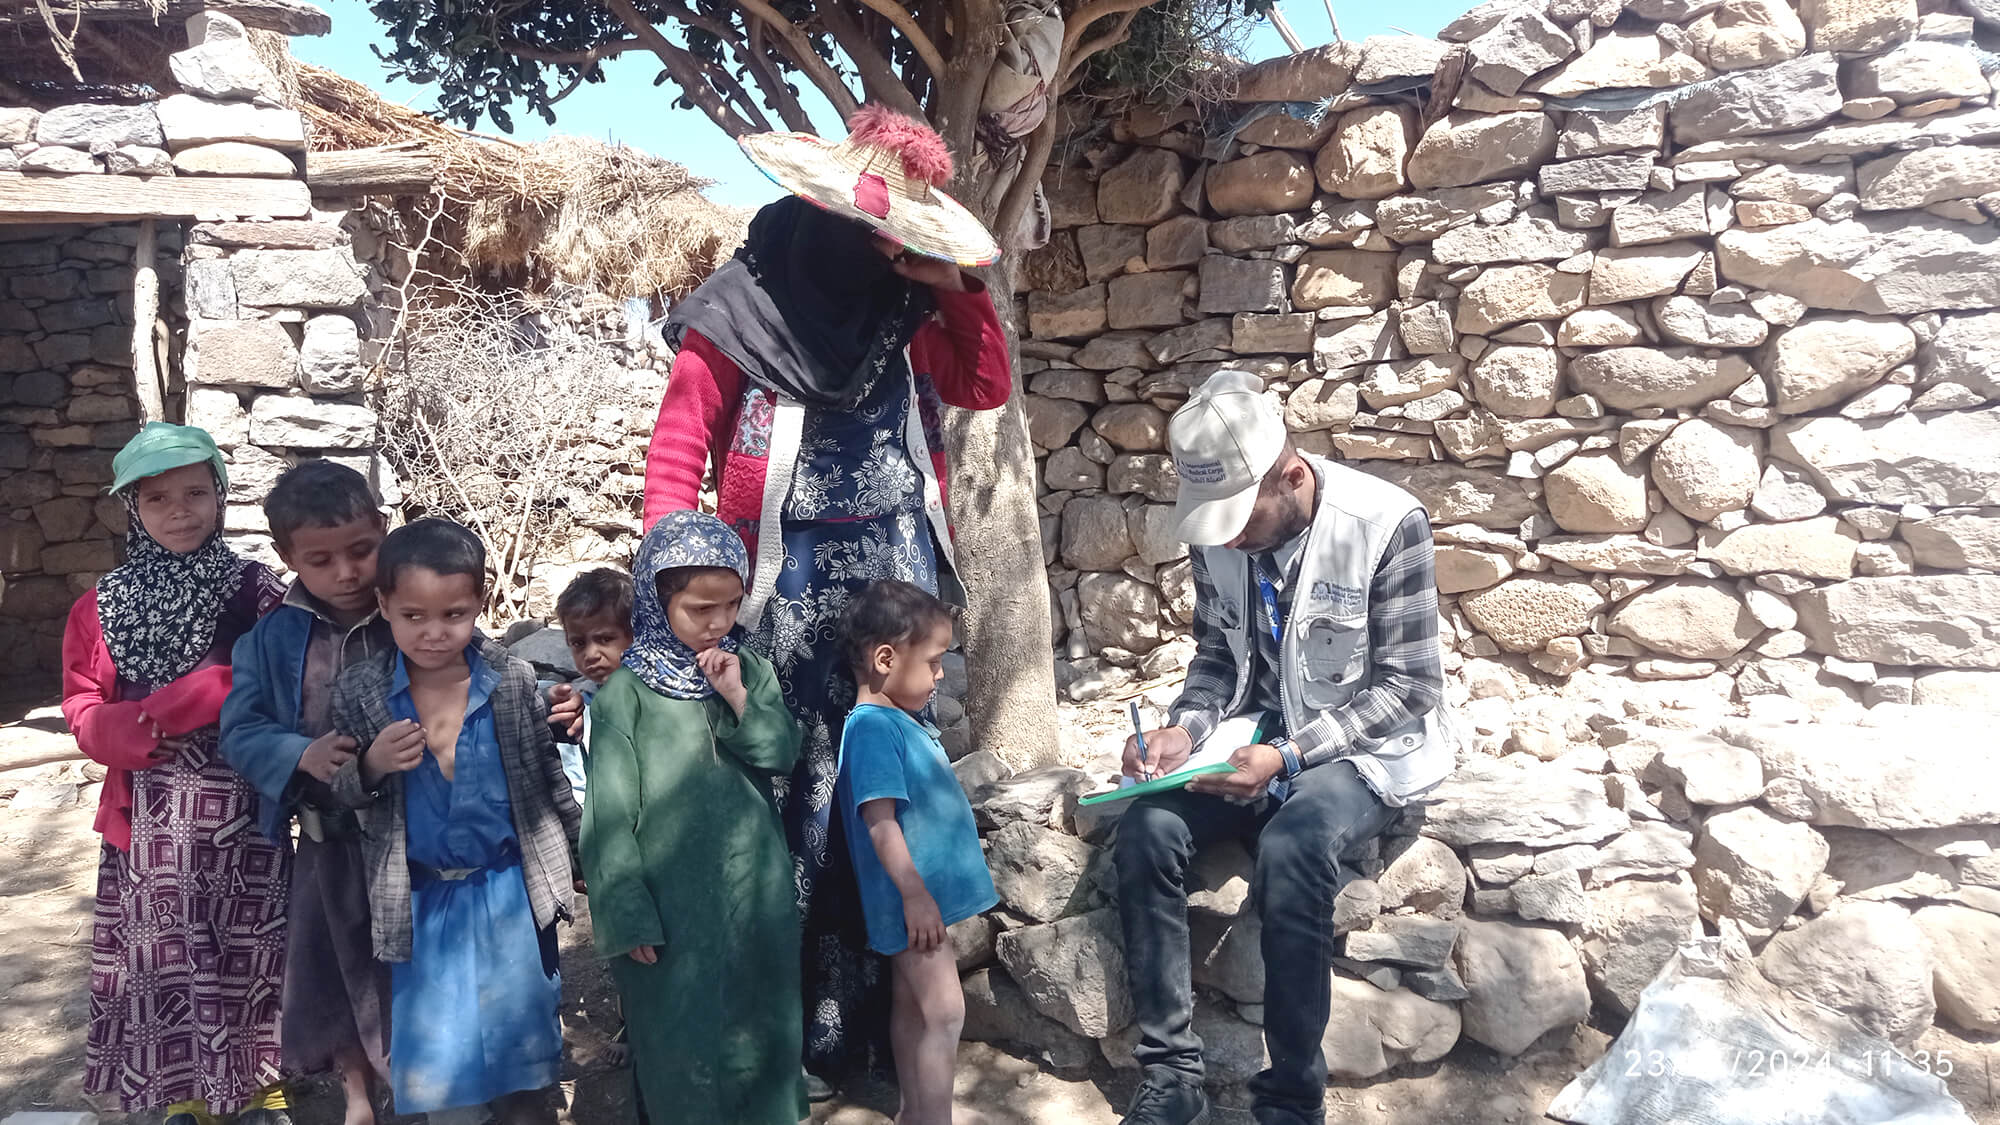 Hosn Saeed Abdullah Ahmed Al-Majnahi stands with her six children in Al-Dhahra village, Yemen.